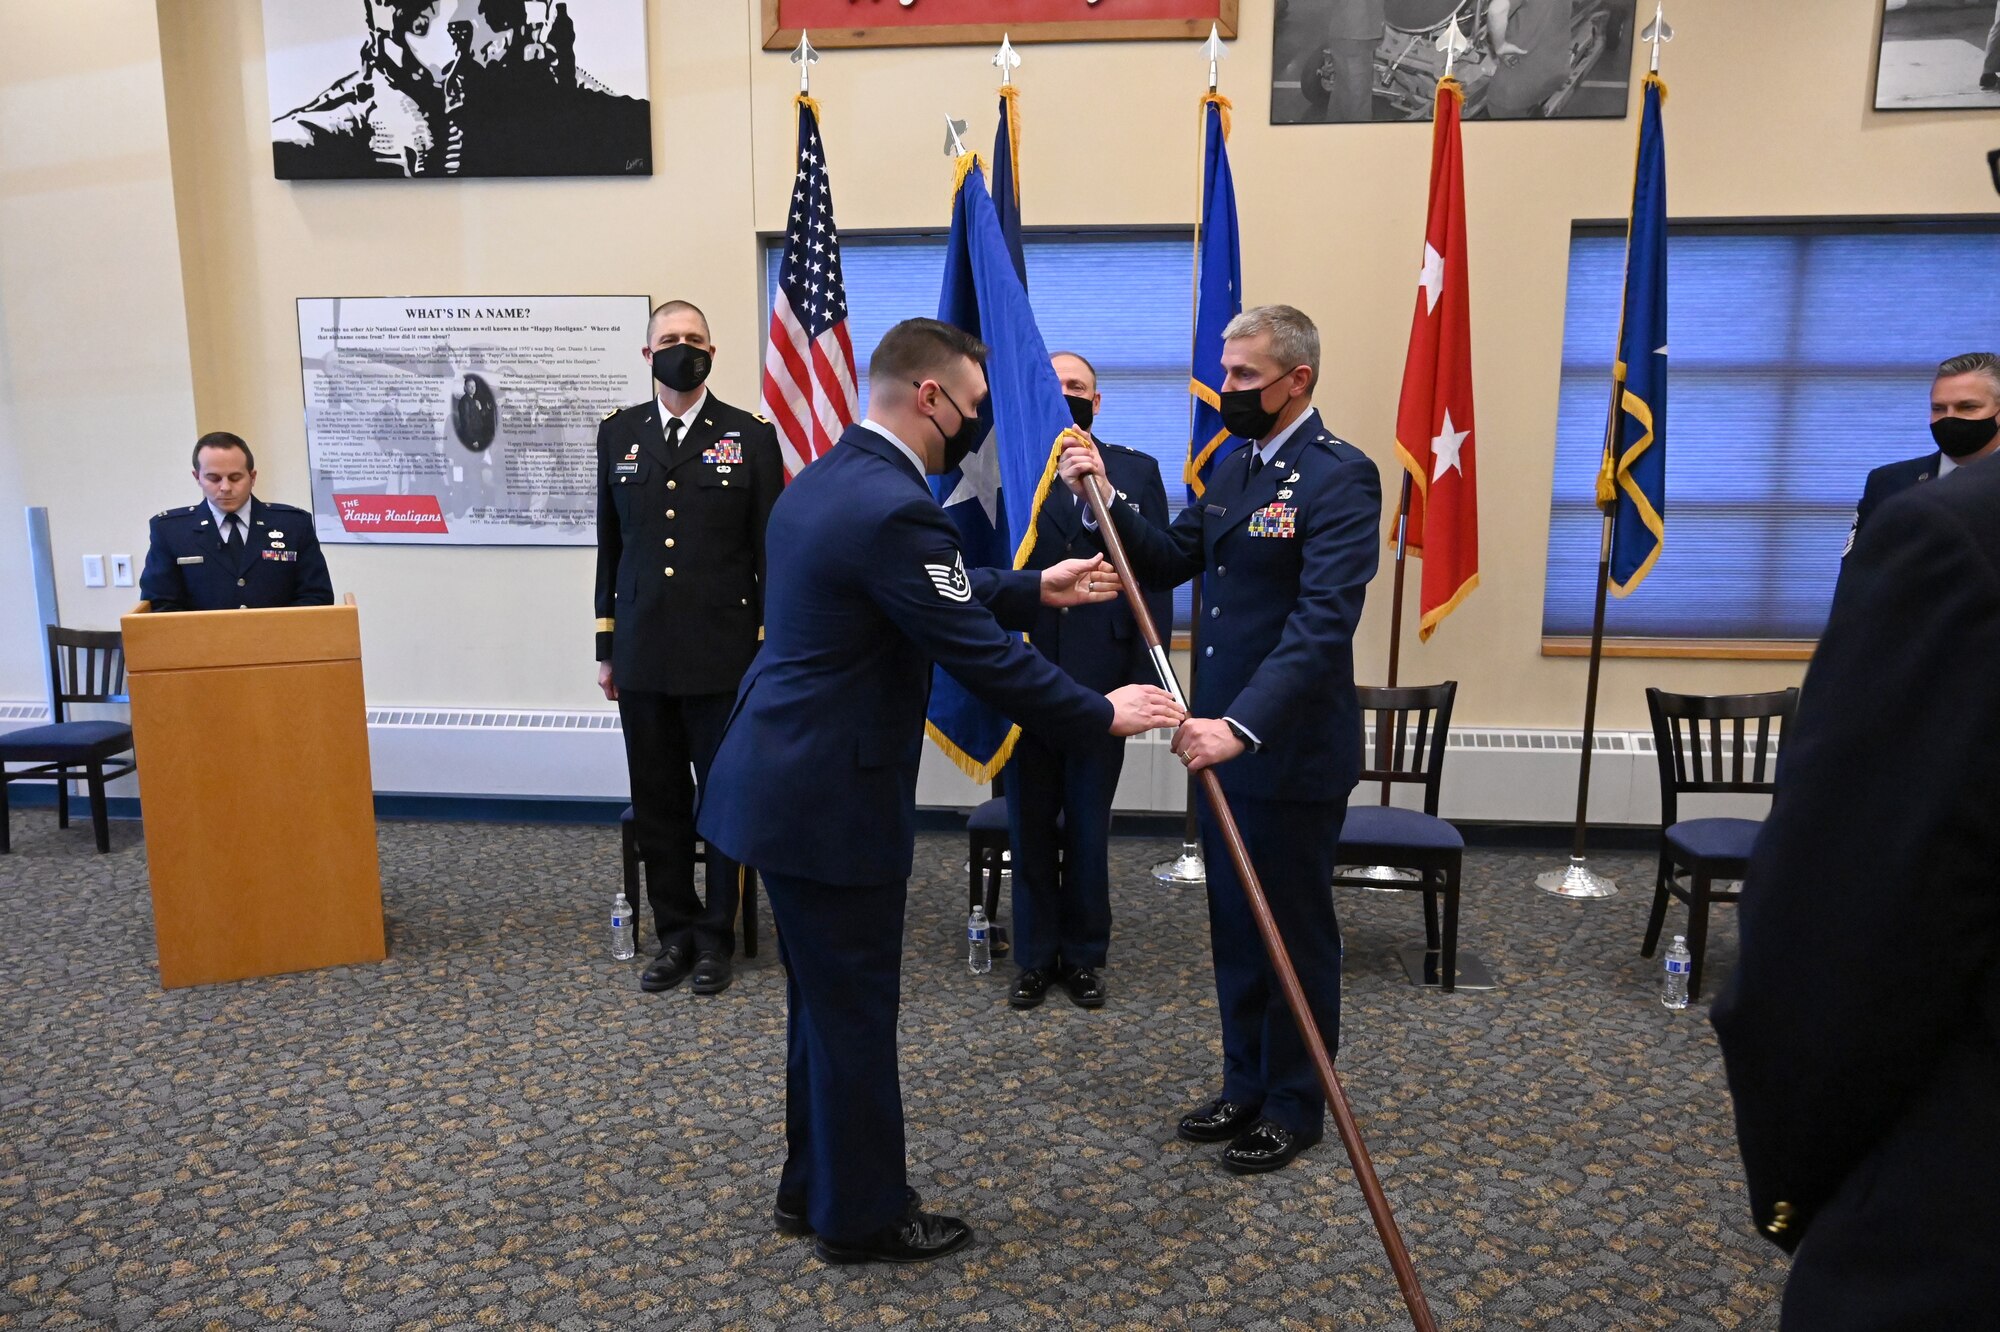 Brig. Gen. Darrin Anderson accepts a symbolic flag staff representing his assumption of responsibility for the position of North Dakota assistant adjutant general for Air from another Airman who is handing him the flag staff during a formal ceremony at the North Dakota Air National Guard Base, Fargo, N.D., April 10, 2021. A party of dignitaries watch the ceremony as they stand behind him.